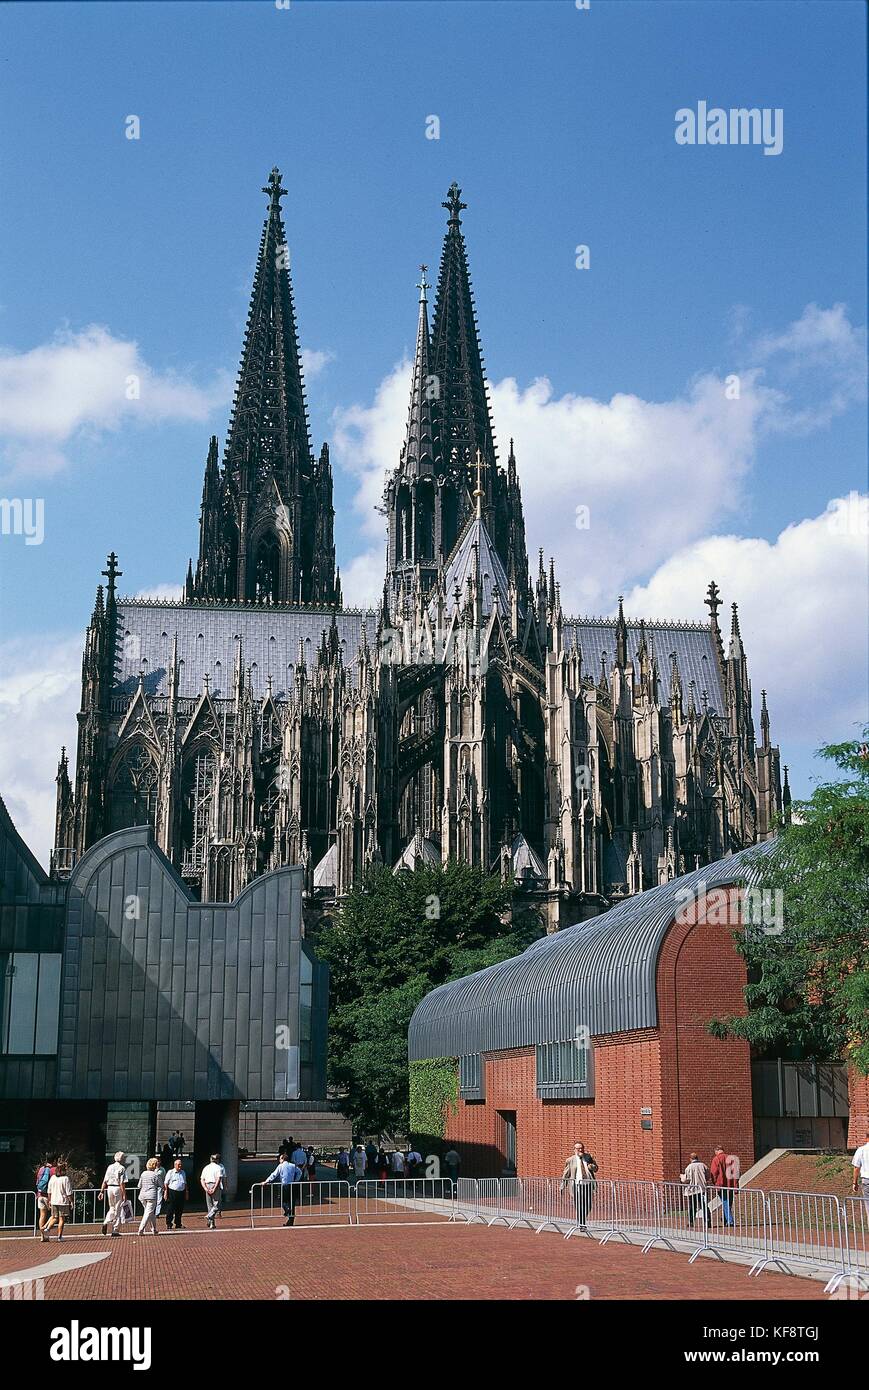 Germany, North Rhine-Westphalia (Nordrhein-Westfalen), Cologne. The Wallraf-Richartz Museum (architect Oswald Mathias Ungers, 2001), and the Cathedral. Stock Photo